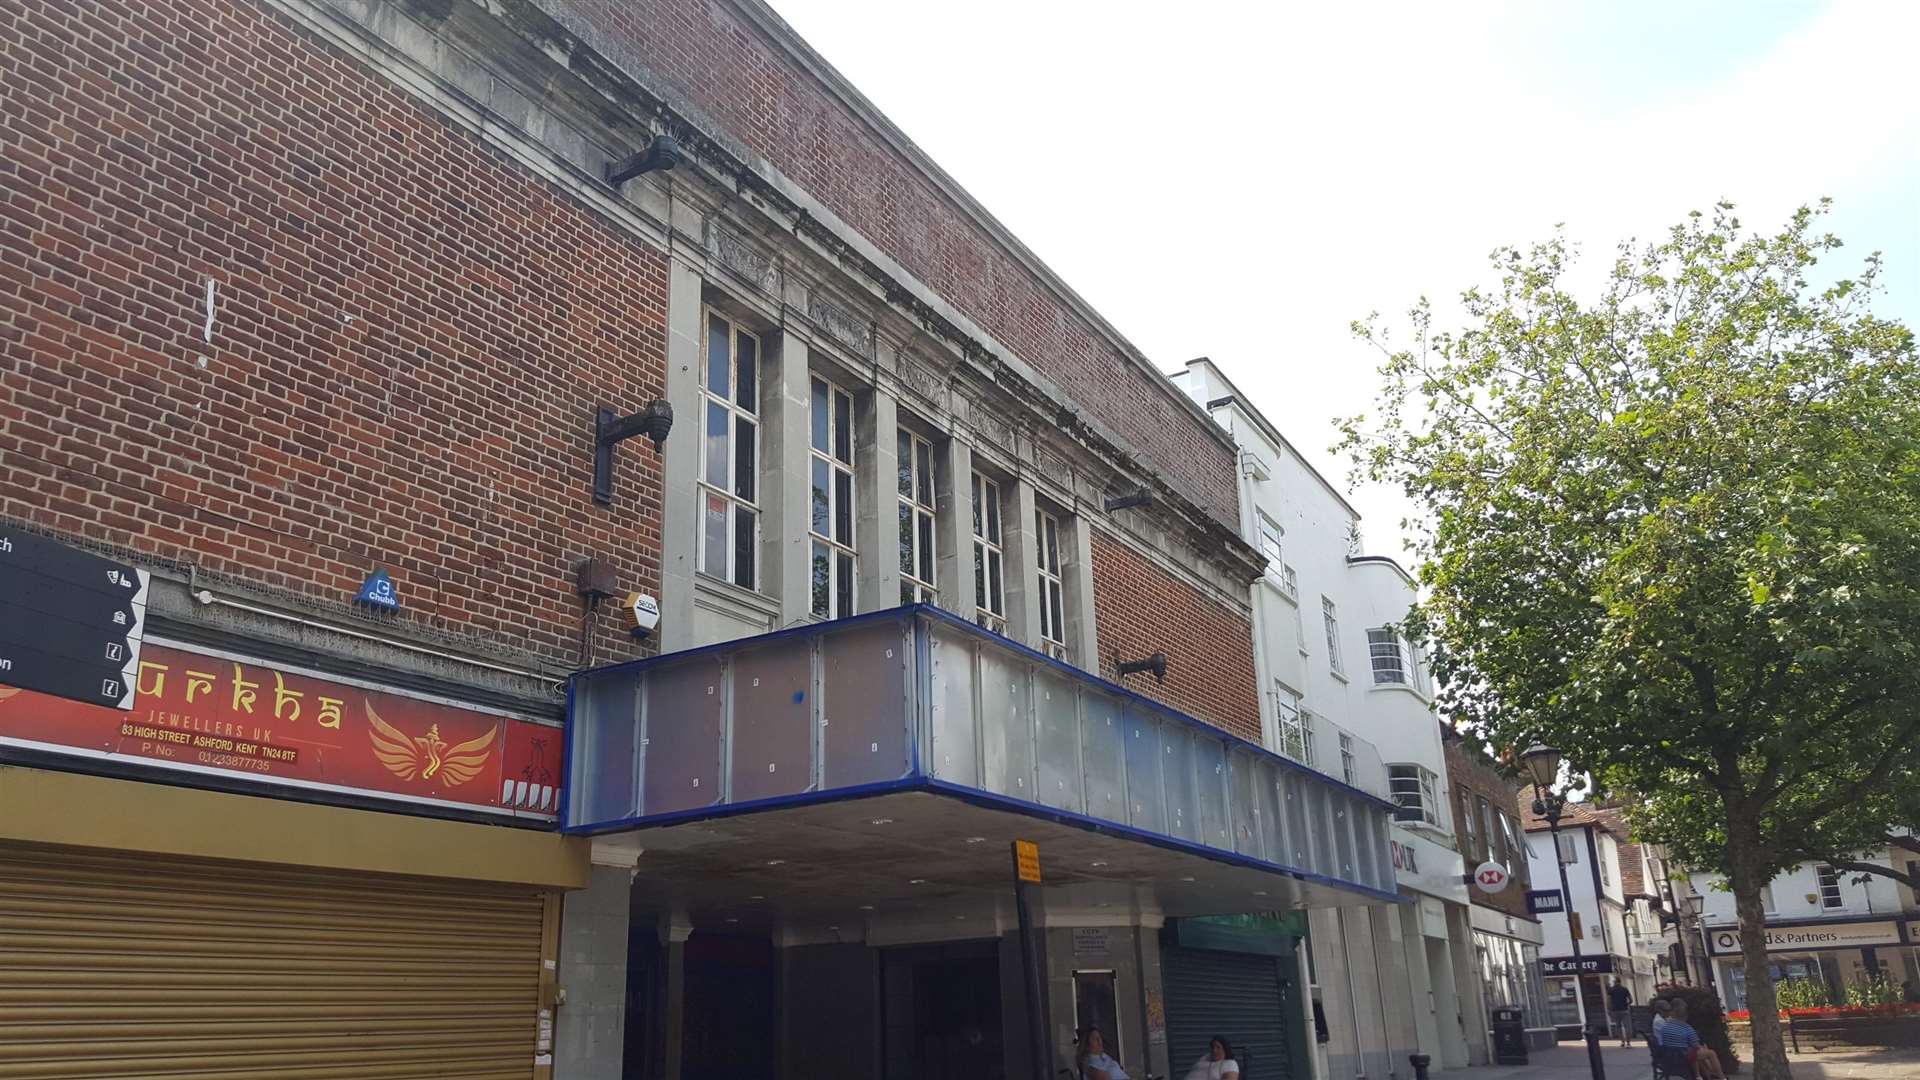 The ex-Odeon is a prominent Lower High Street site